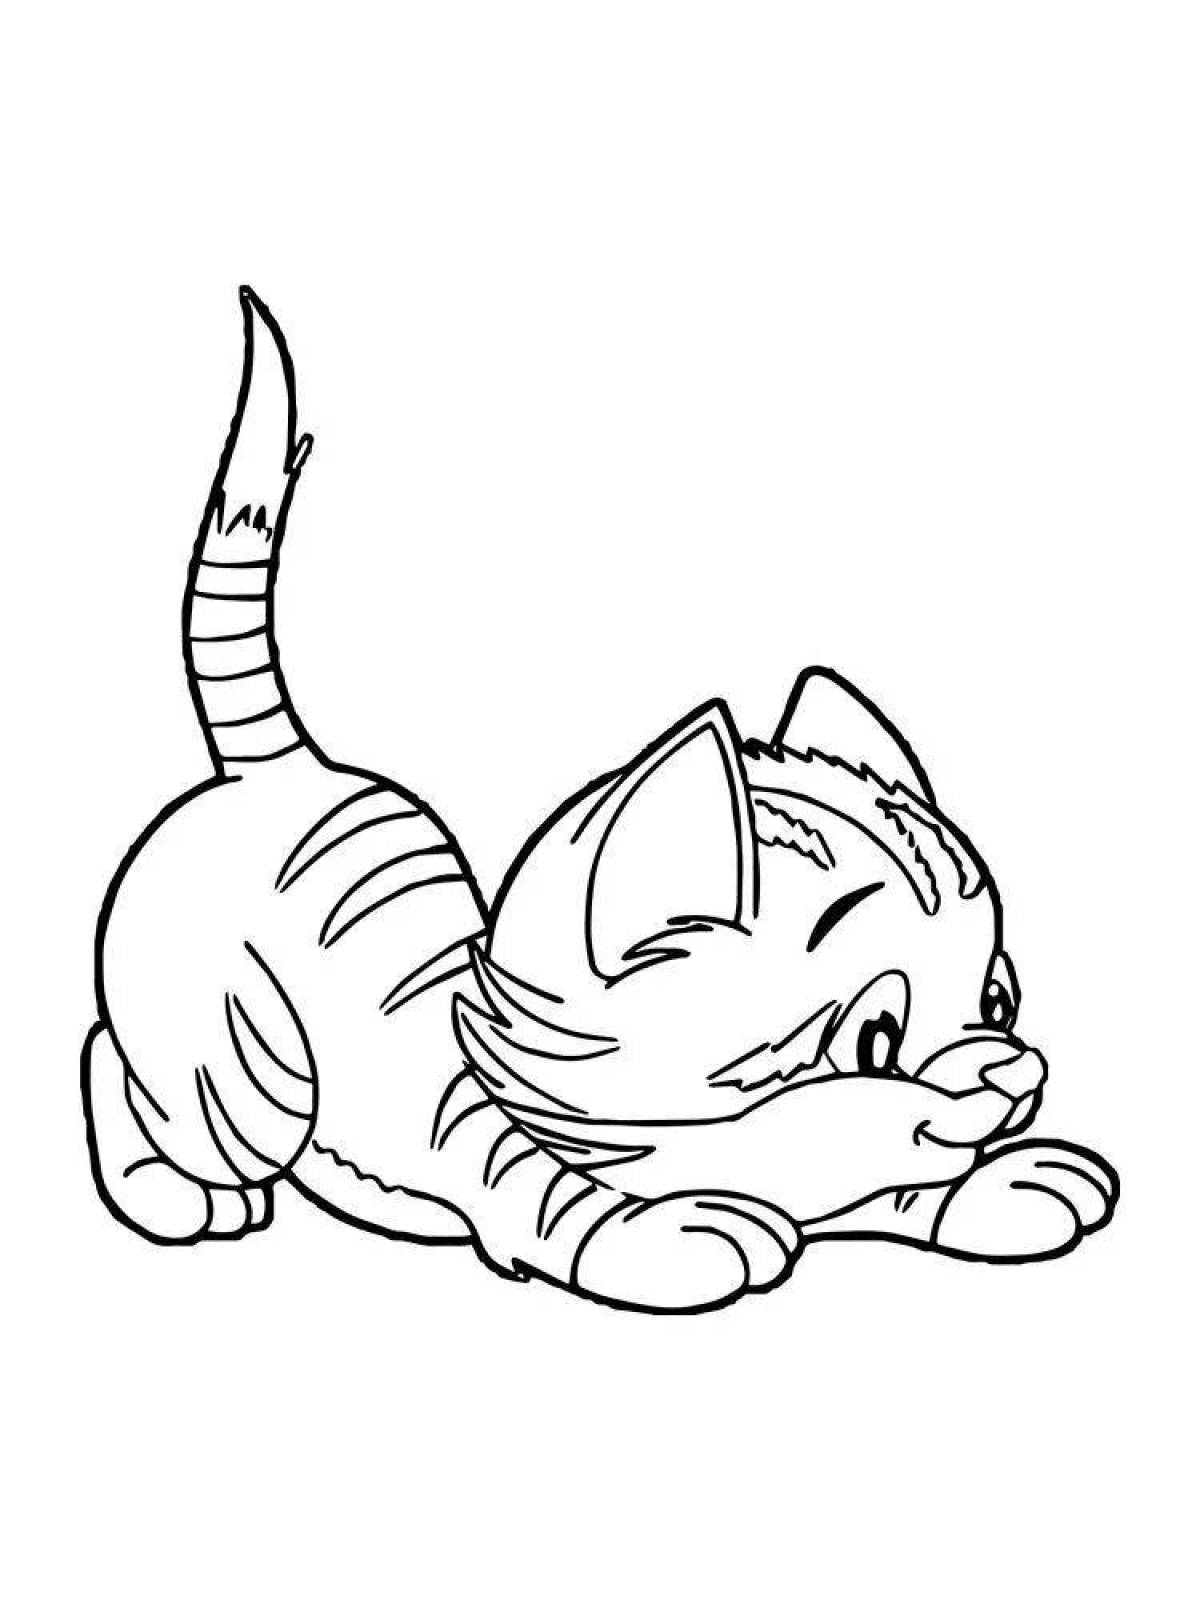 Curious kitten coloring page